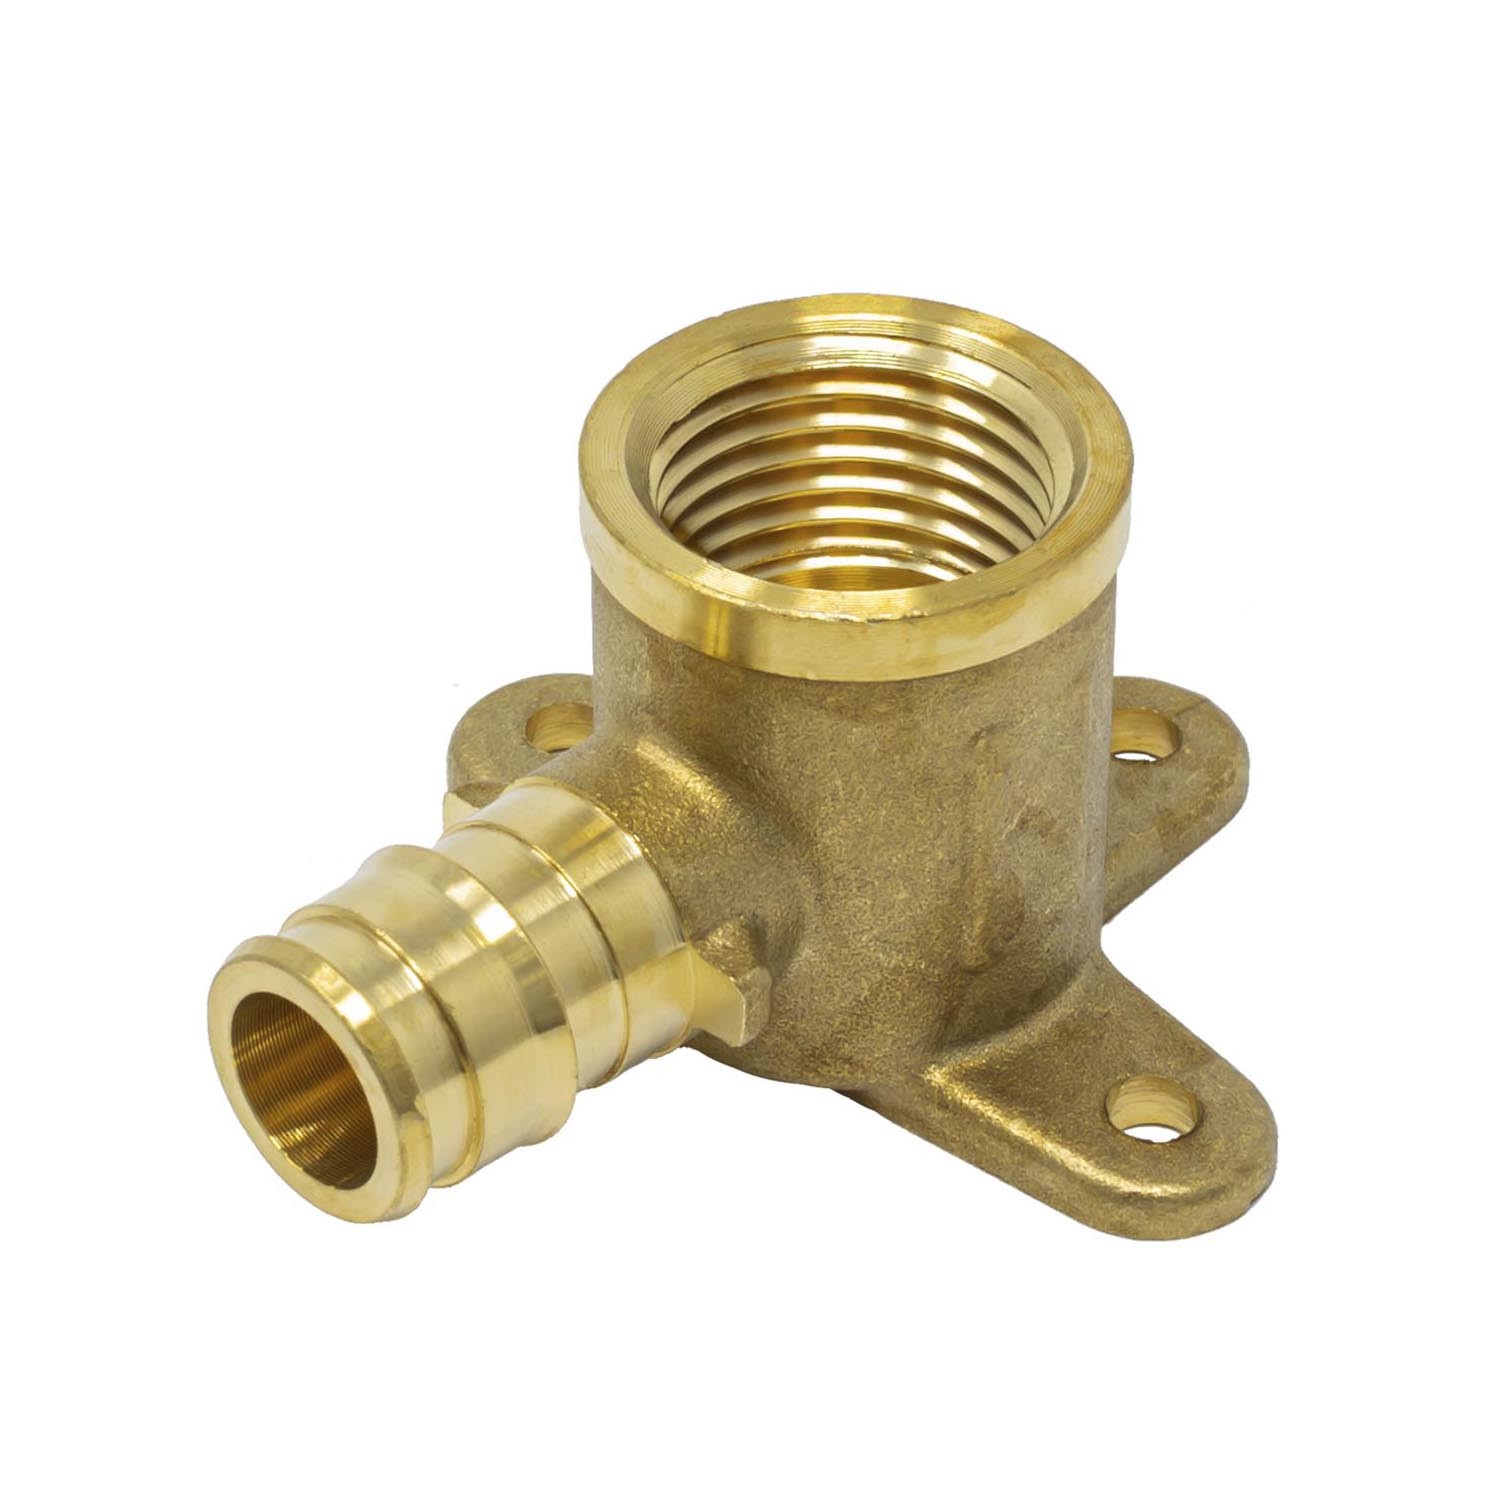 ASTM F1960 Free Lead Brass Expansion PEX Tee